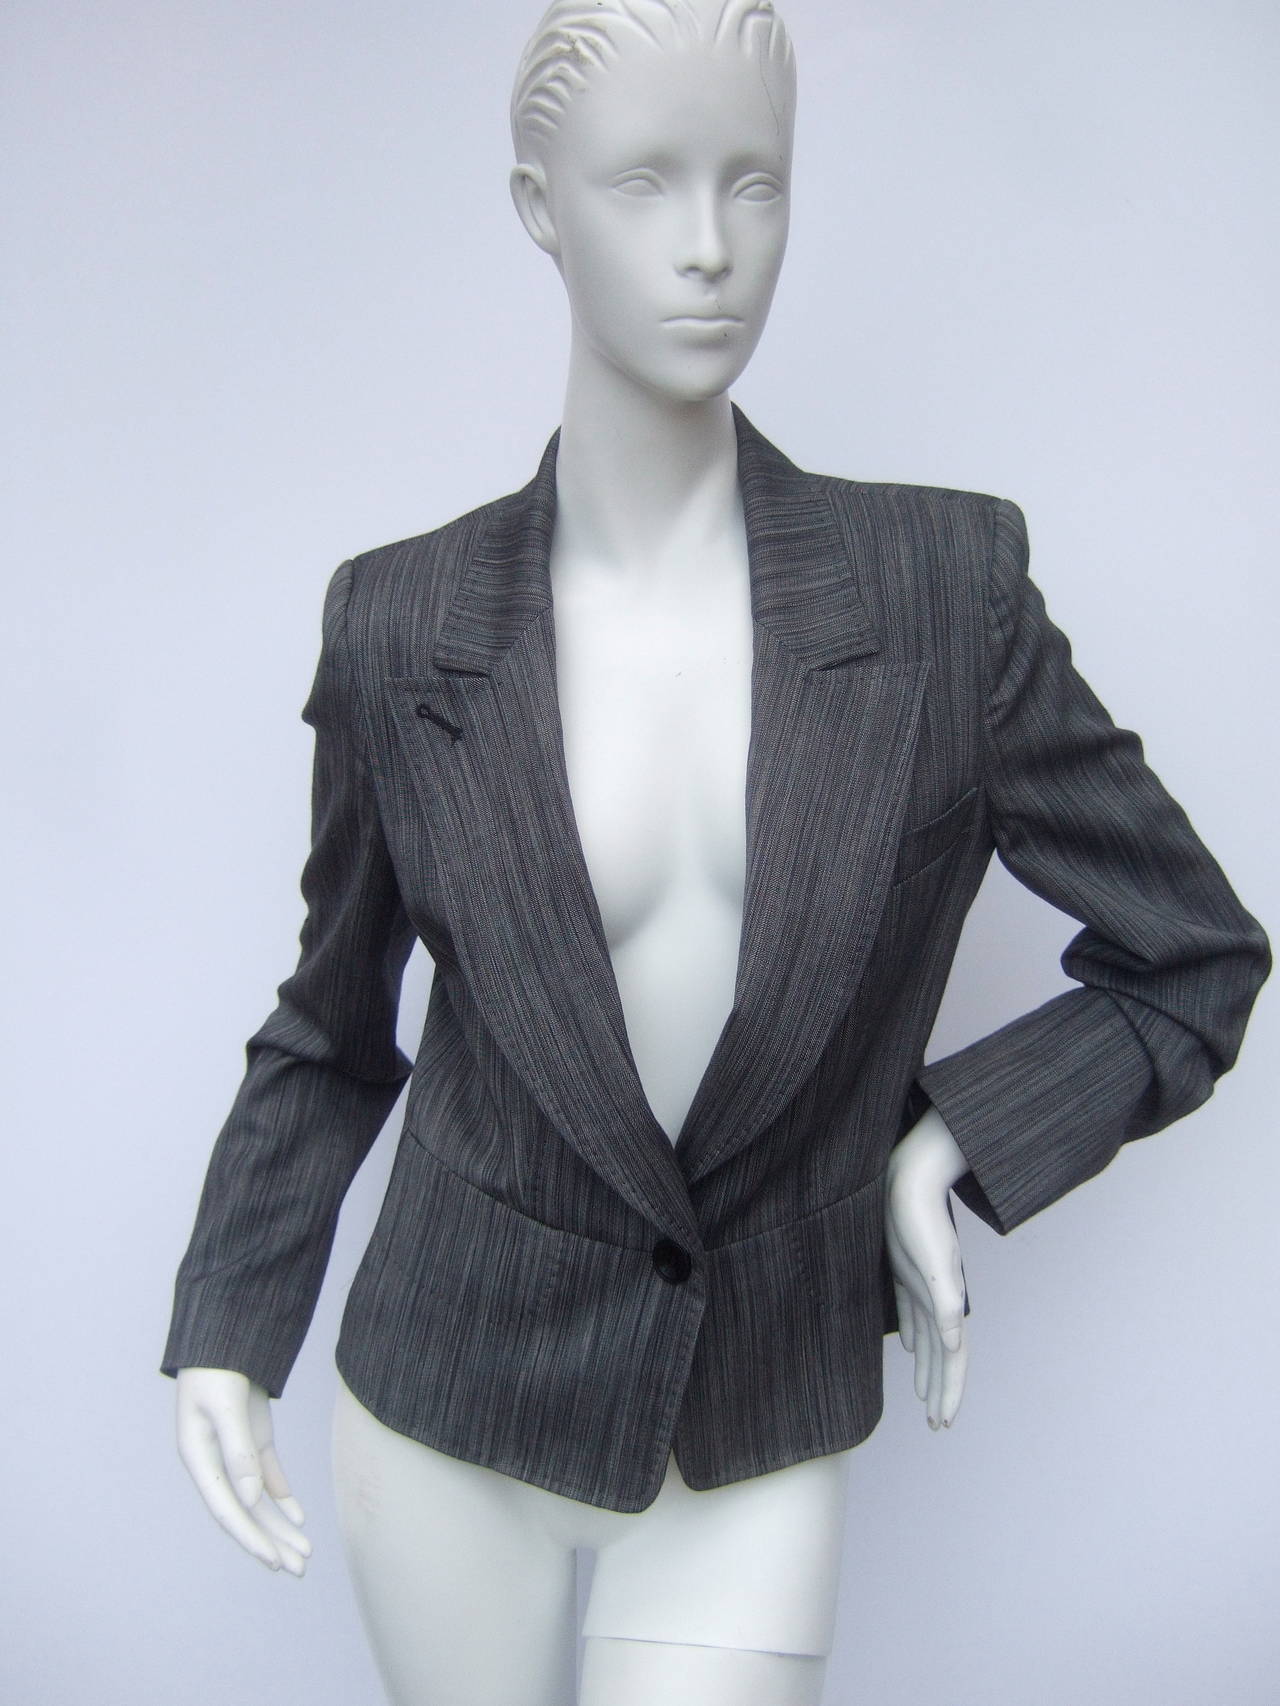 Herve Leger Paris Gray wool tailored jacket US Size 4
The stylish designer jacket is light weight wool with two tone gray colors  The wool is designed with a subtle herringbone striped pattern

The chic jacket is designed with saddle stitch